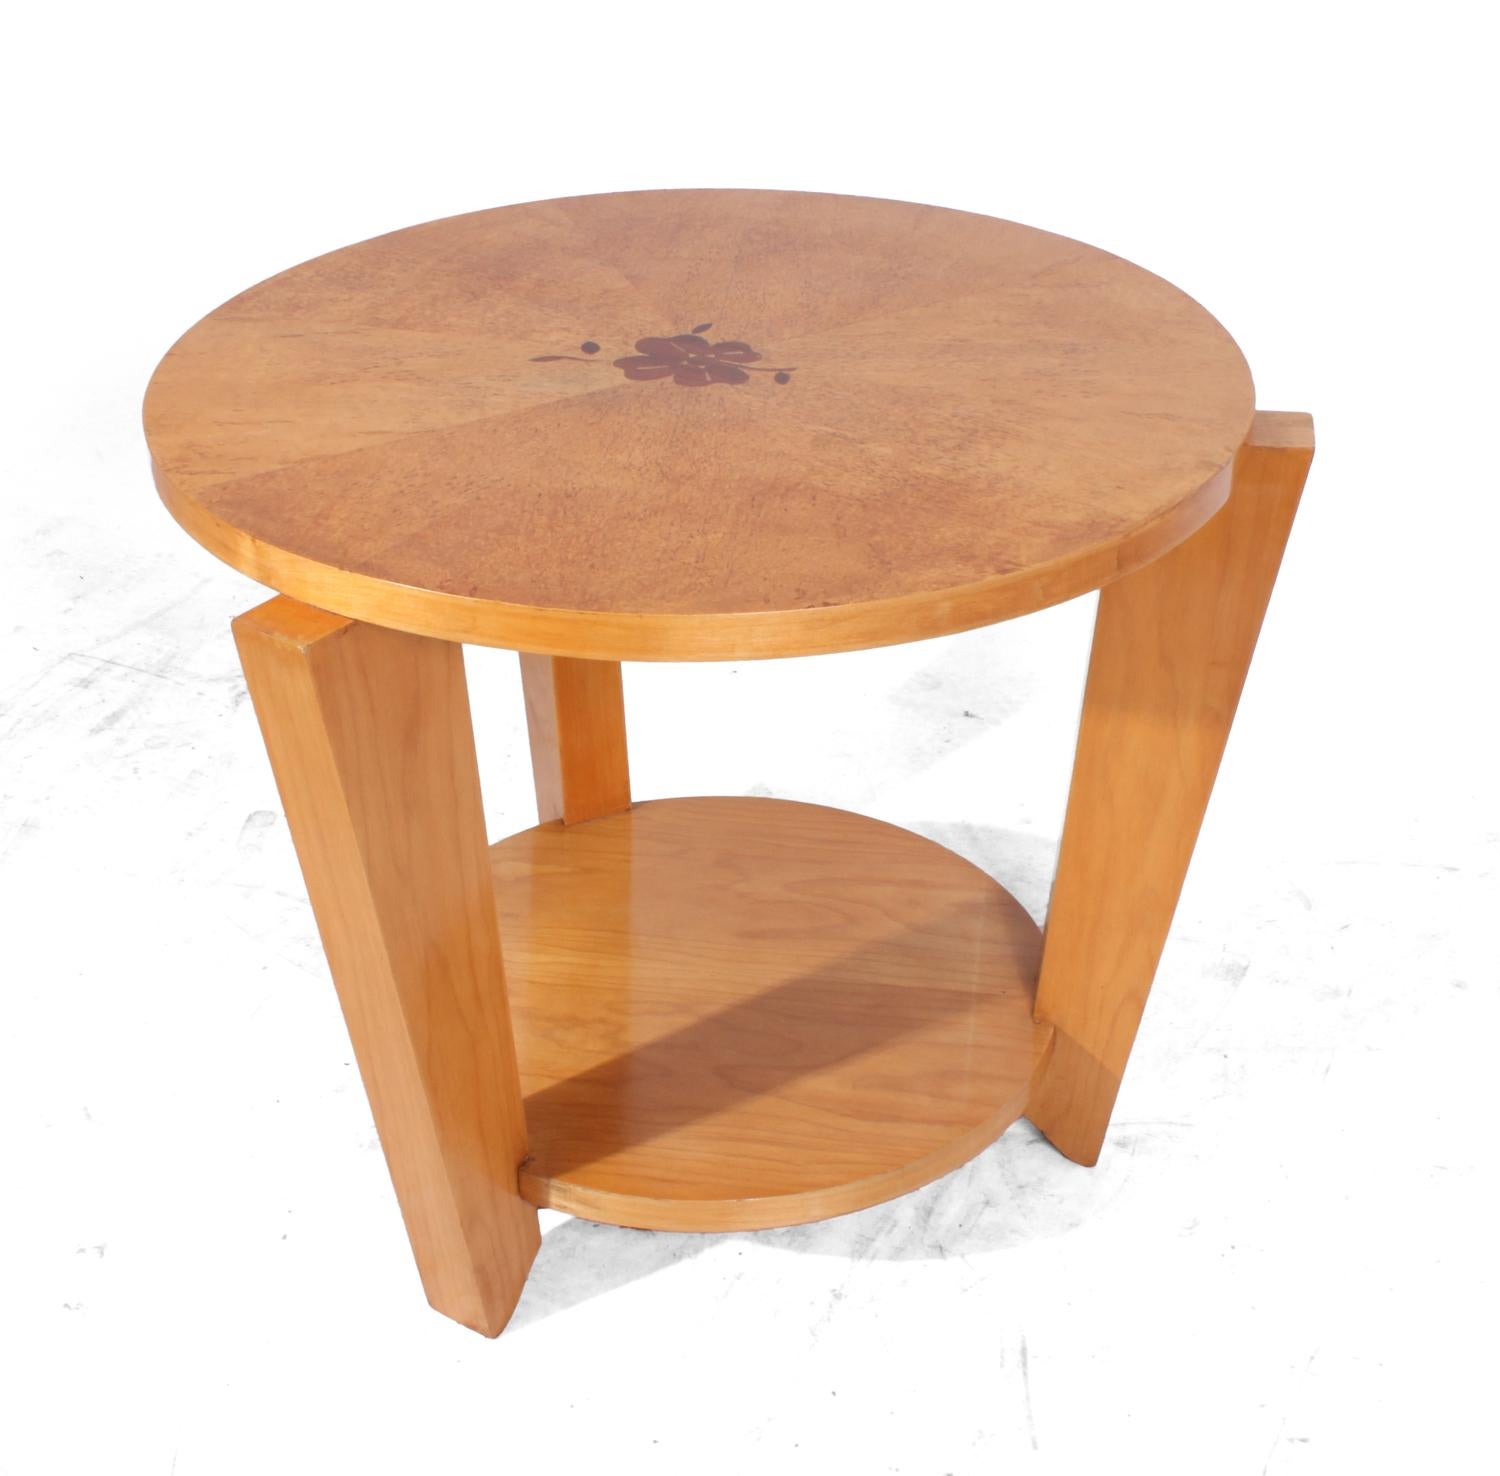 Karelian birch Art Deco occasional table
A very stylish little table with a Karelian birch top with inlaid flower motif in the centre this table has been fully hand polished and is in excellent condition throughout.

Age: 1950

Style: Art